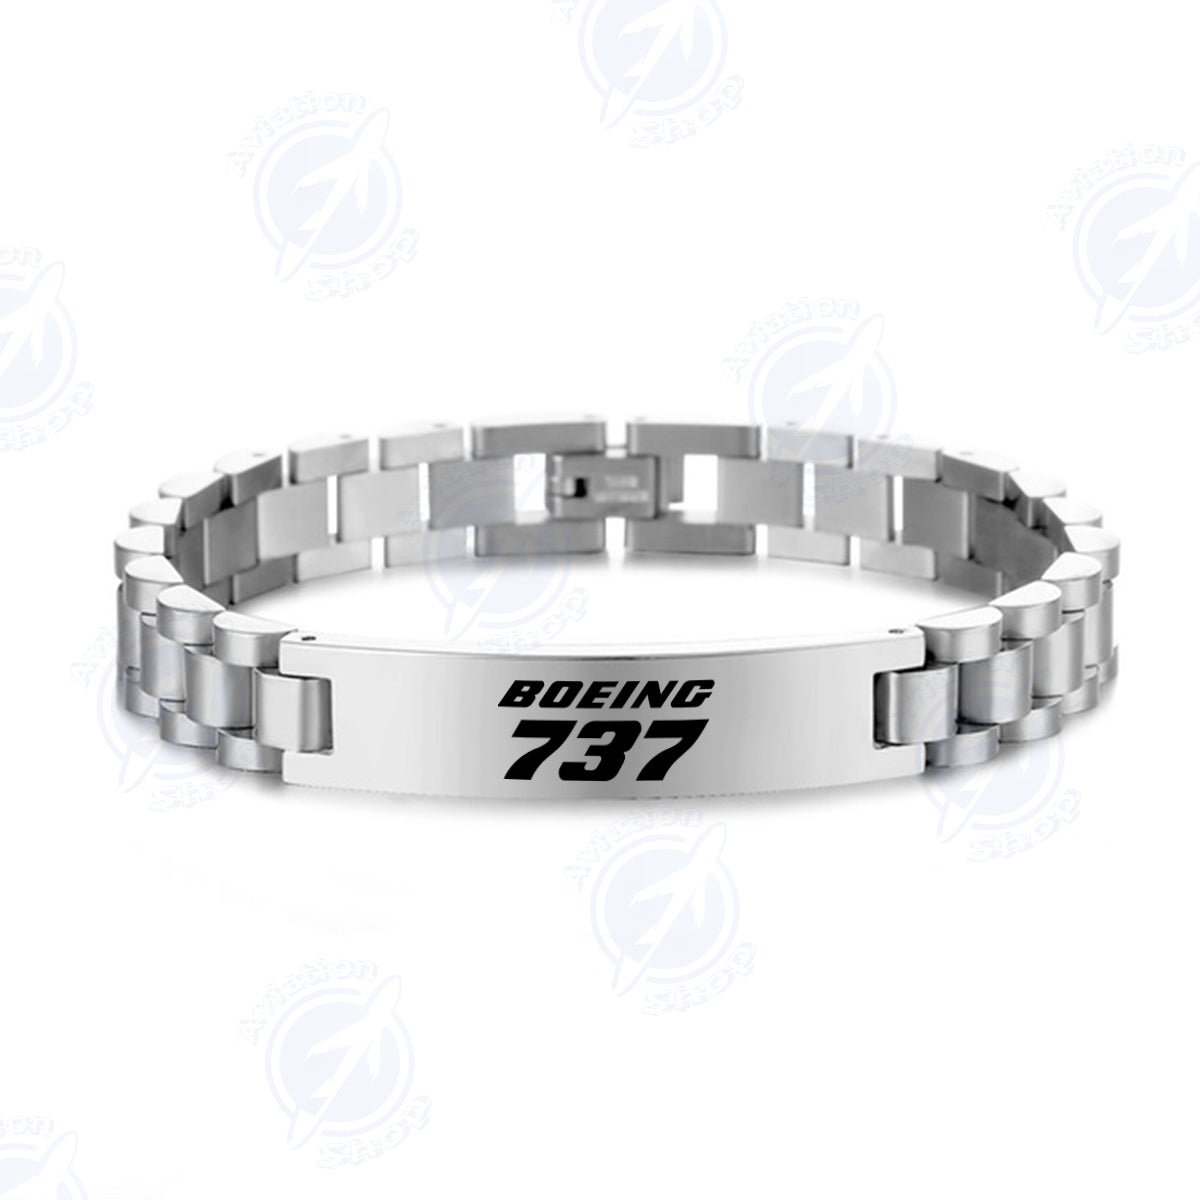 Boeing 737 & Text Designed Stainless Steel Chain Bracelets